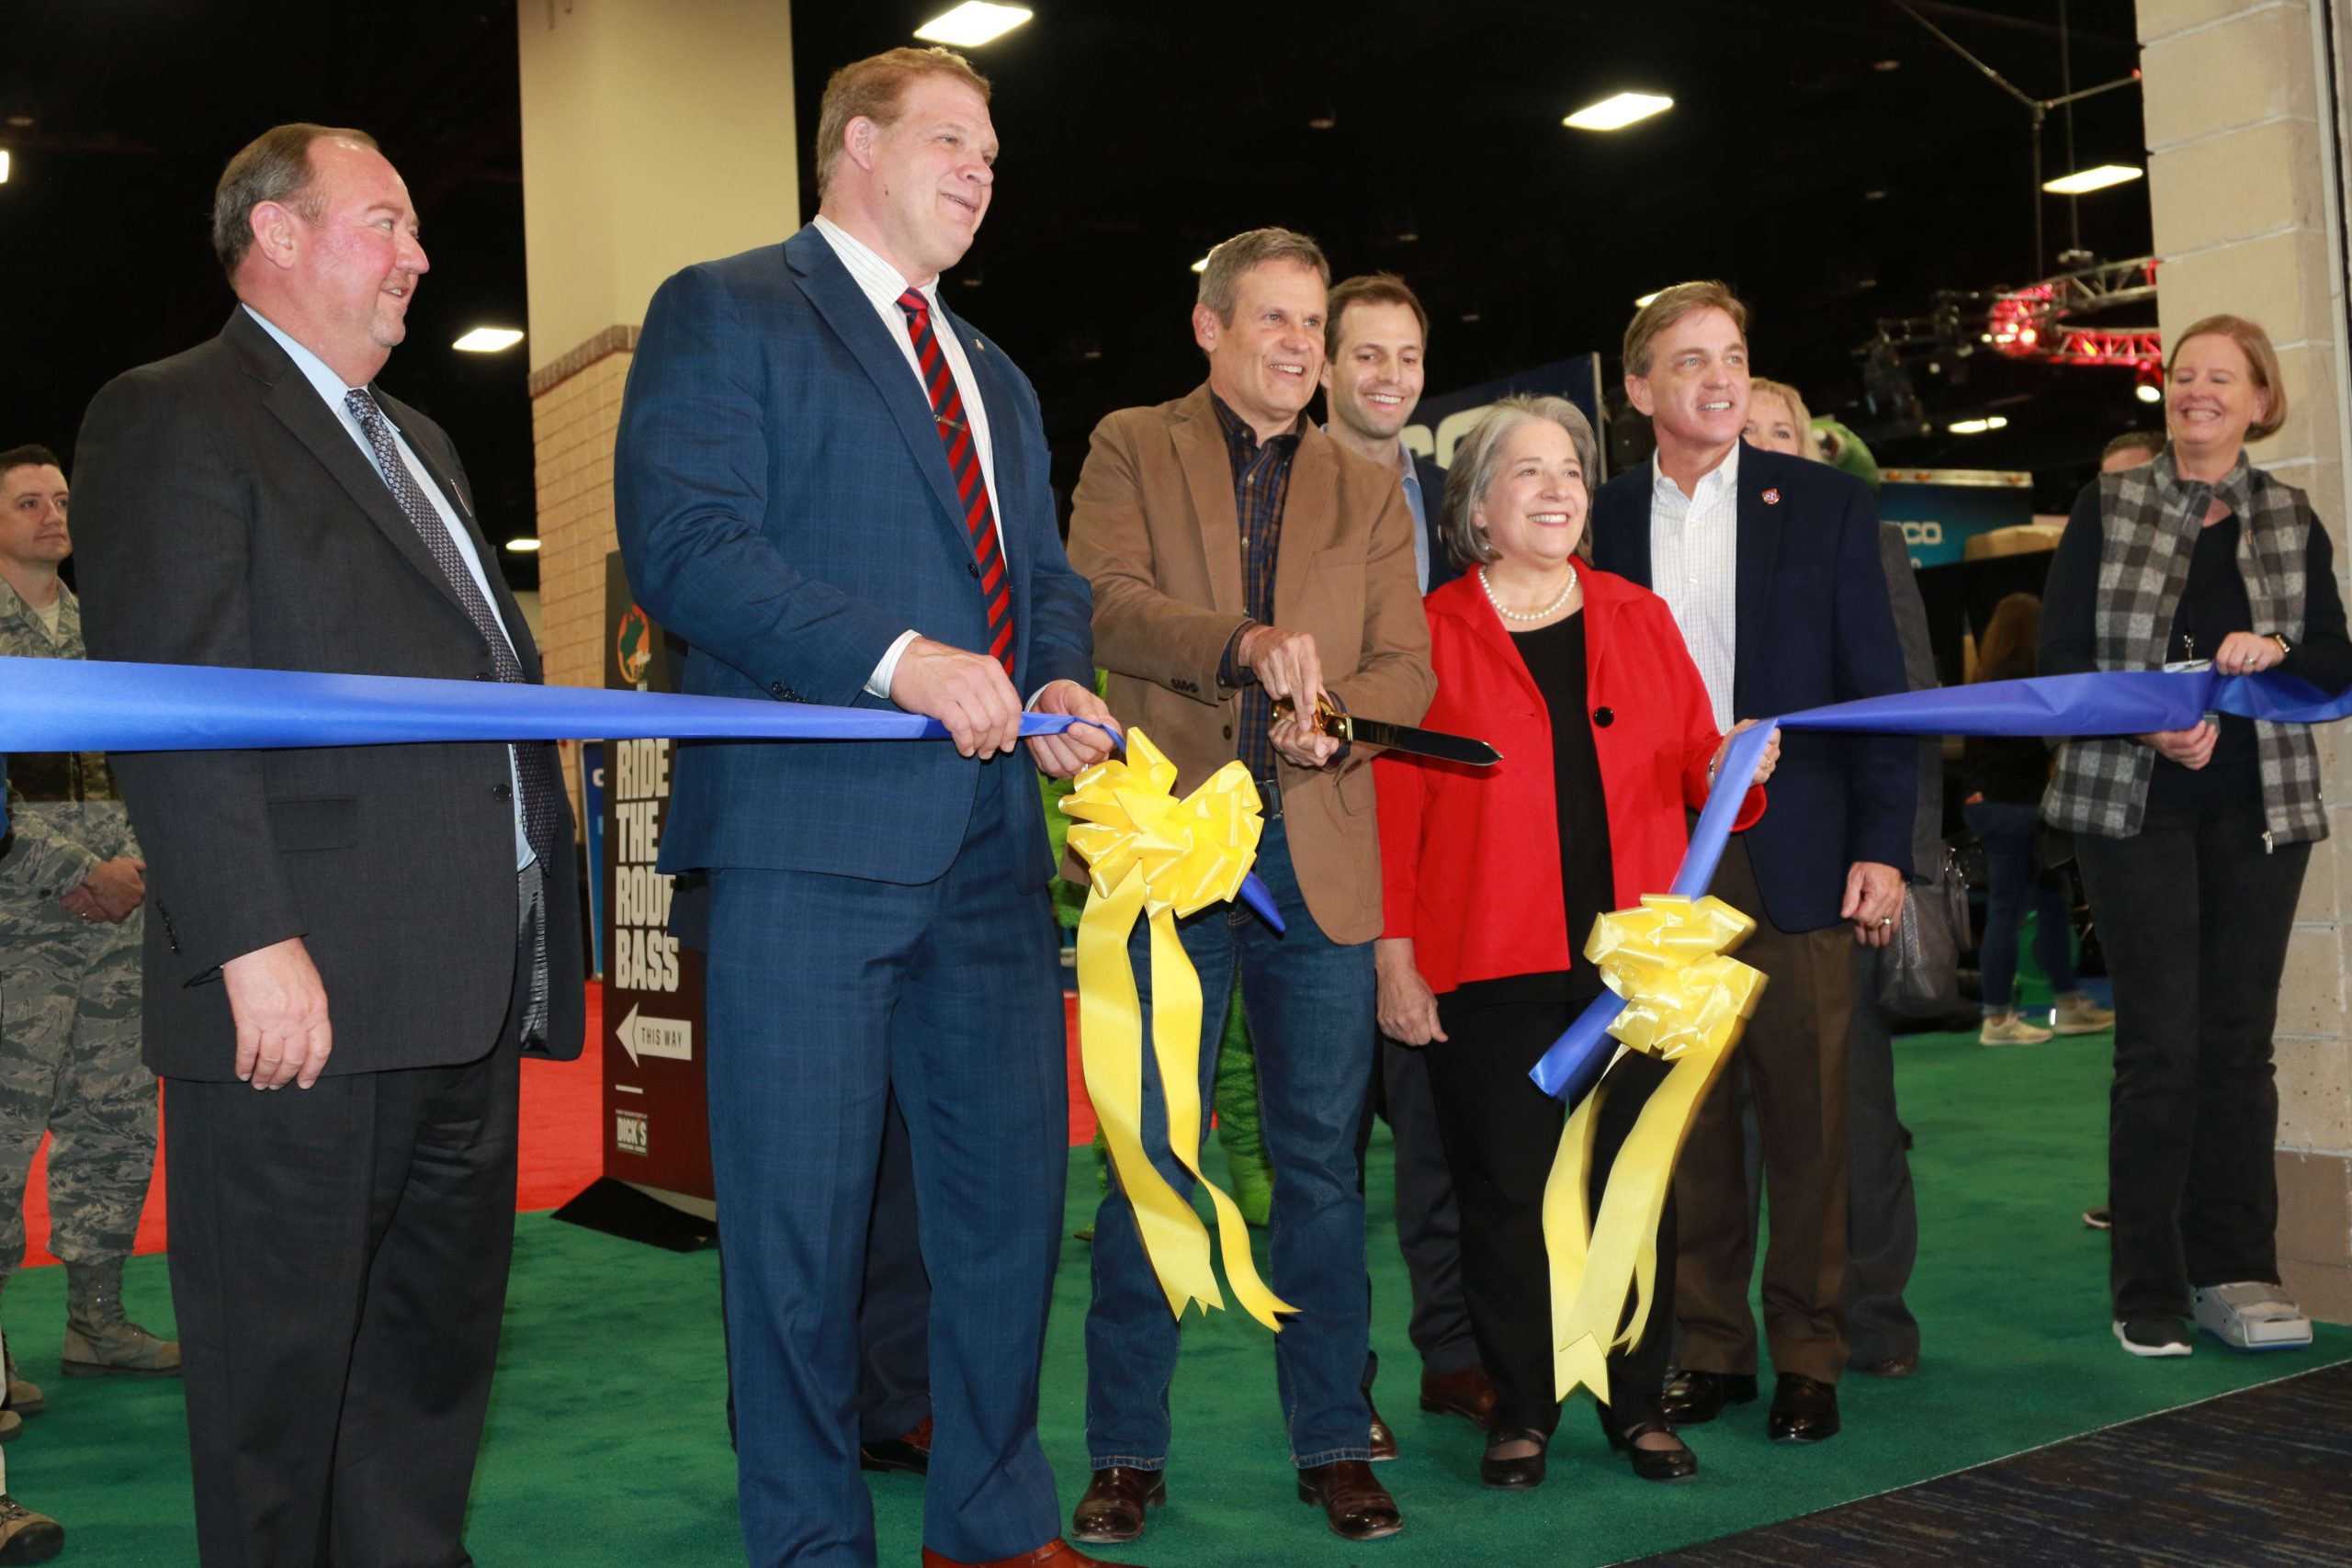 With one swift cut, Tennessee Governor Bill Lee officially opens the Bassmaster Classic Expo